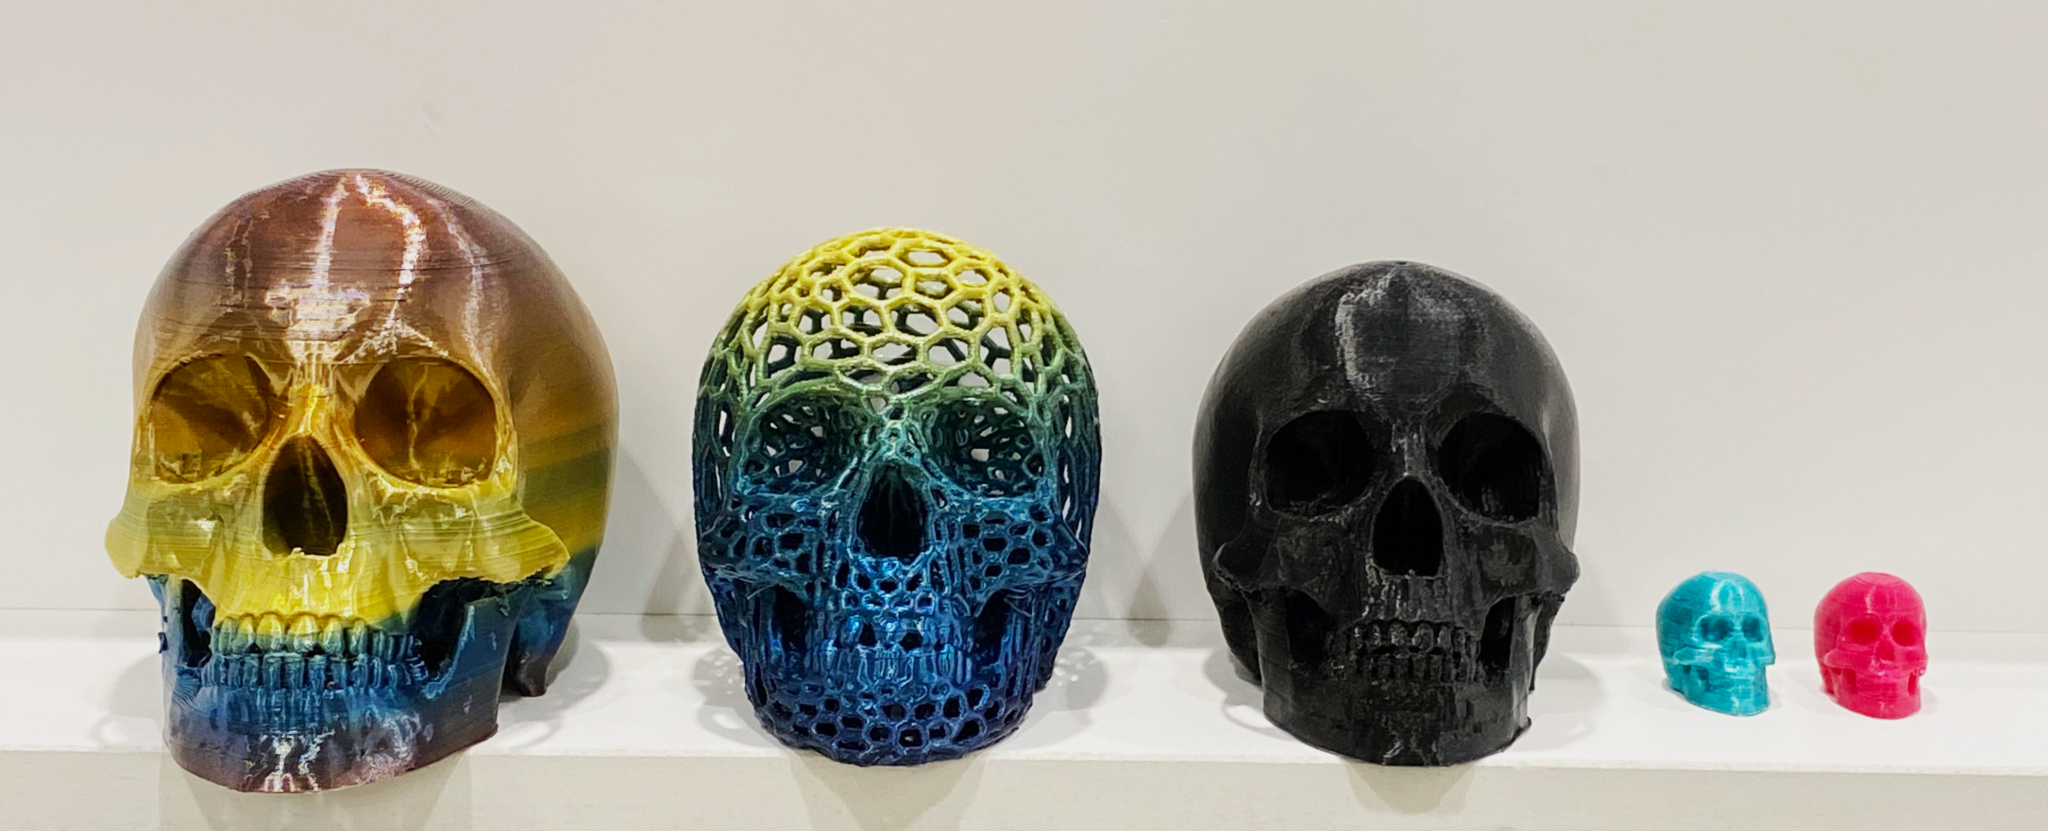 5 3-D printed skulls, from largest to smallest. The first two are using rainbow silk PLA filament, the third using black PLA filament, and the last two tiny skulls using silk teal and hot pink PLA filaments.